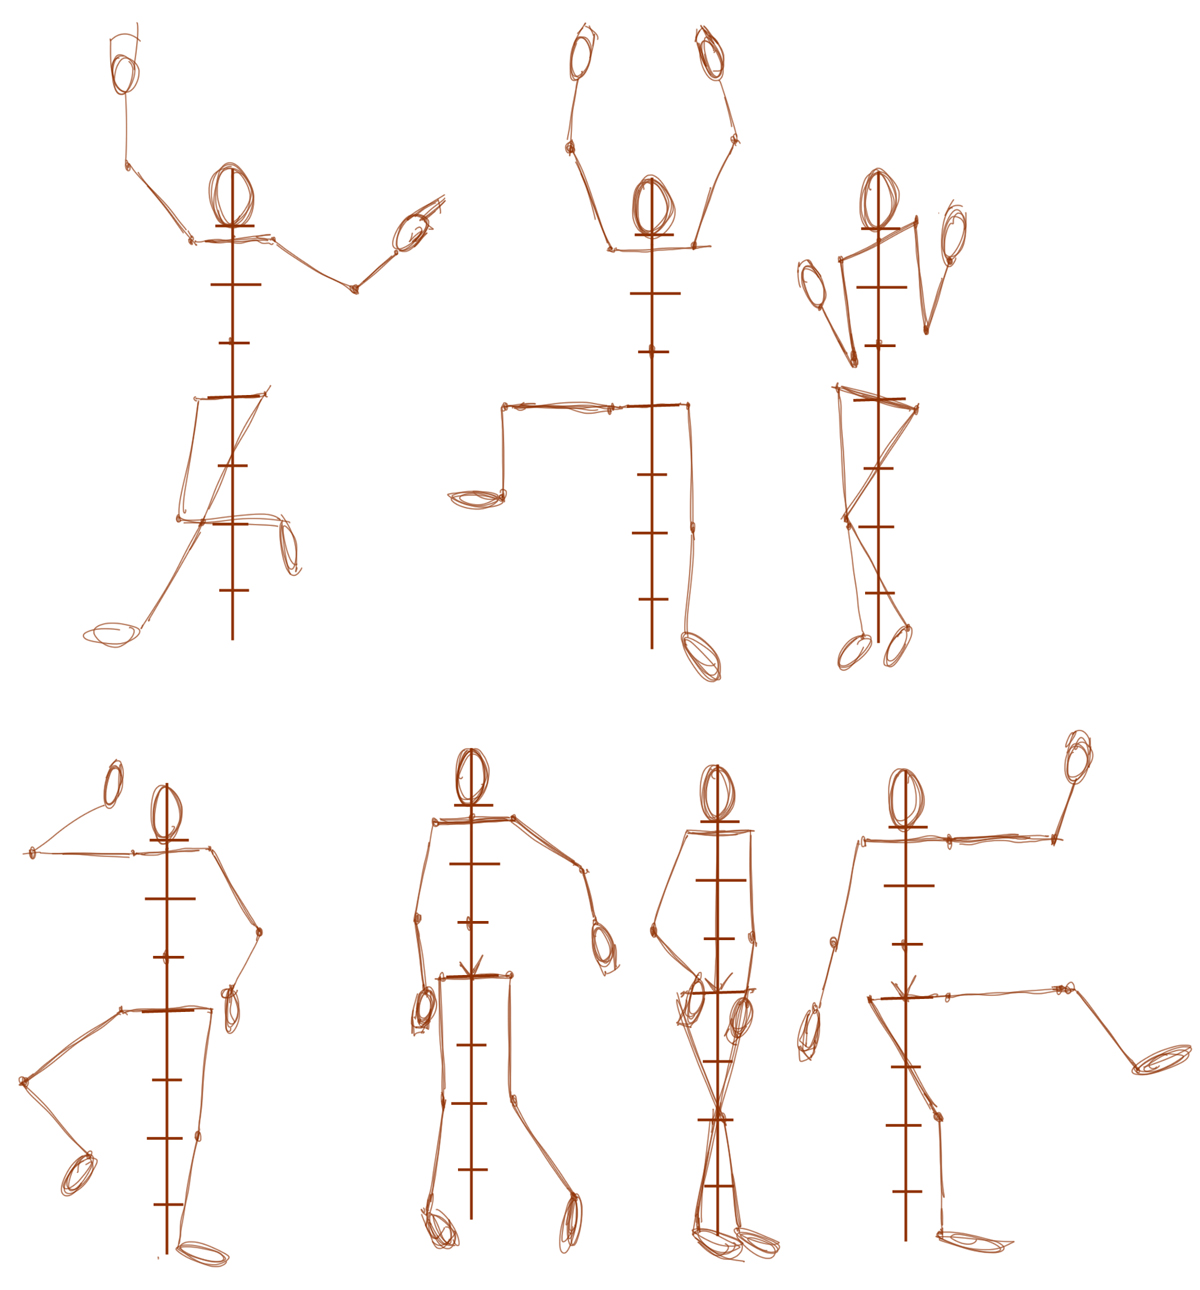 Learn How To Draw Human Figures In Correct Proportions By Memorizing